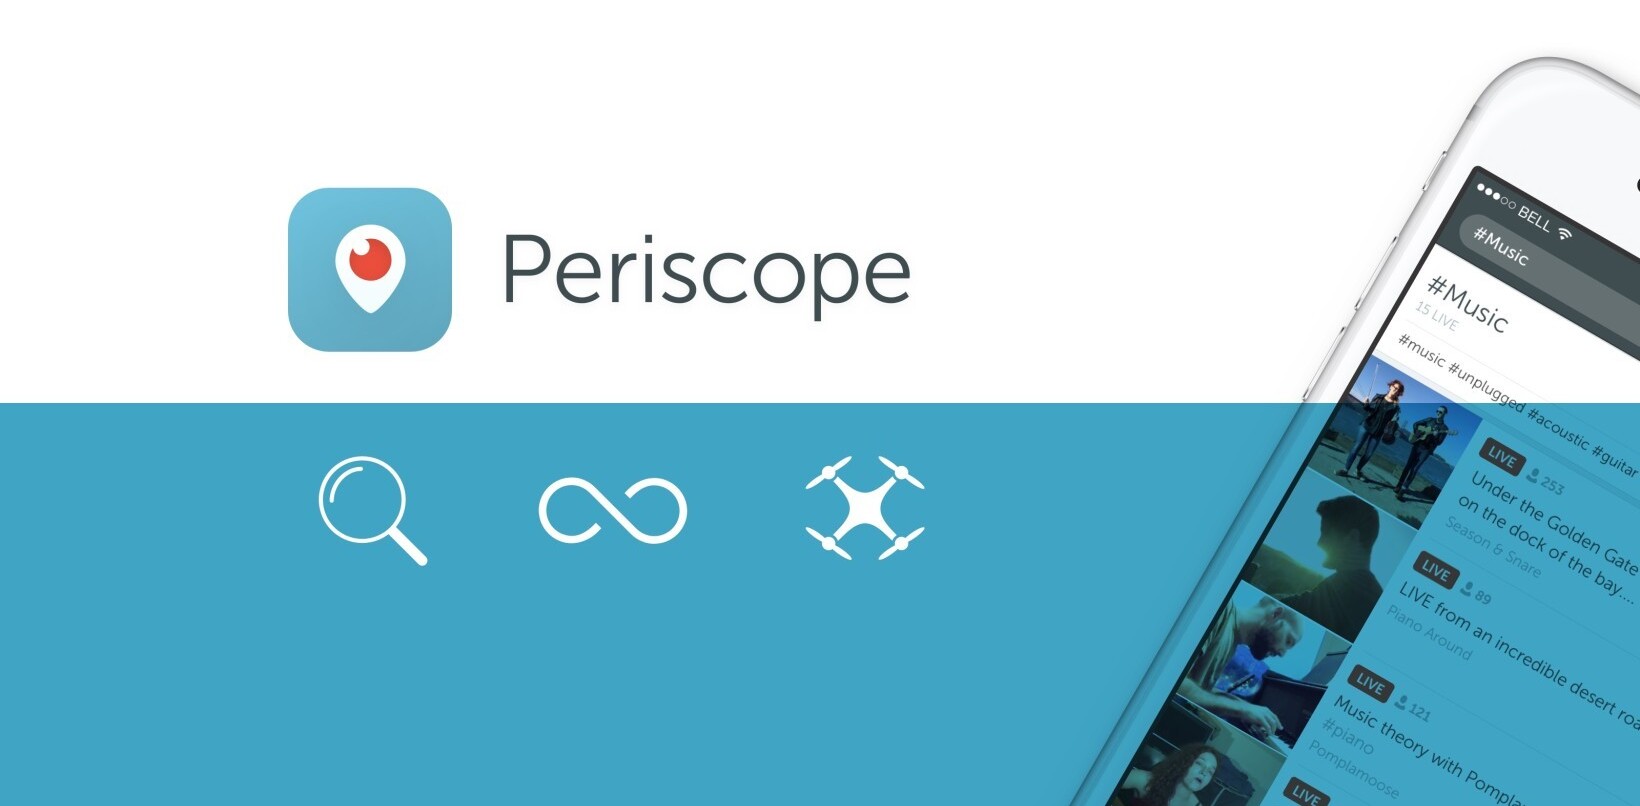 Periscope is adding search and save features along with the ability to stream from a drone